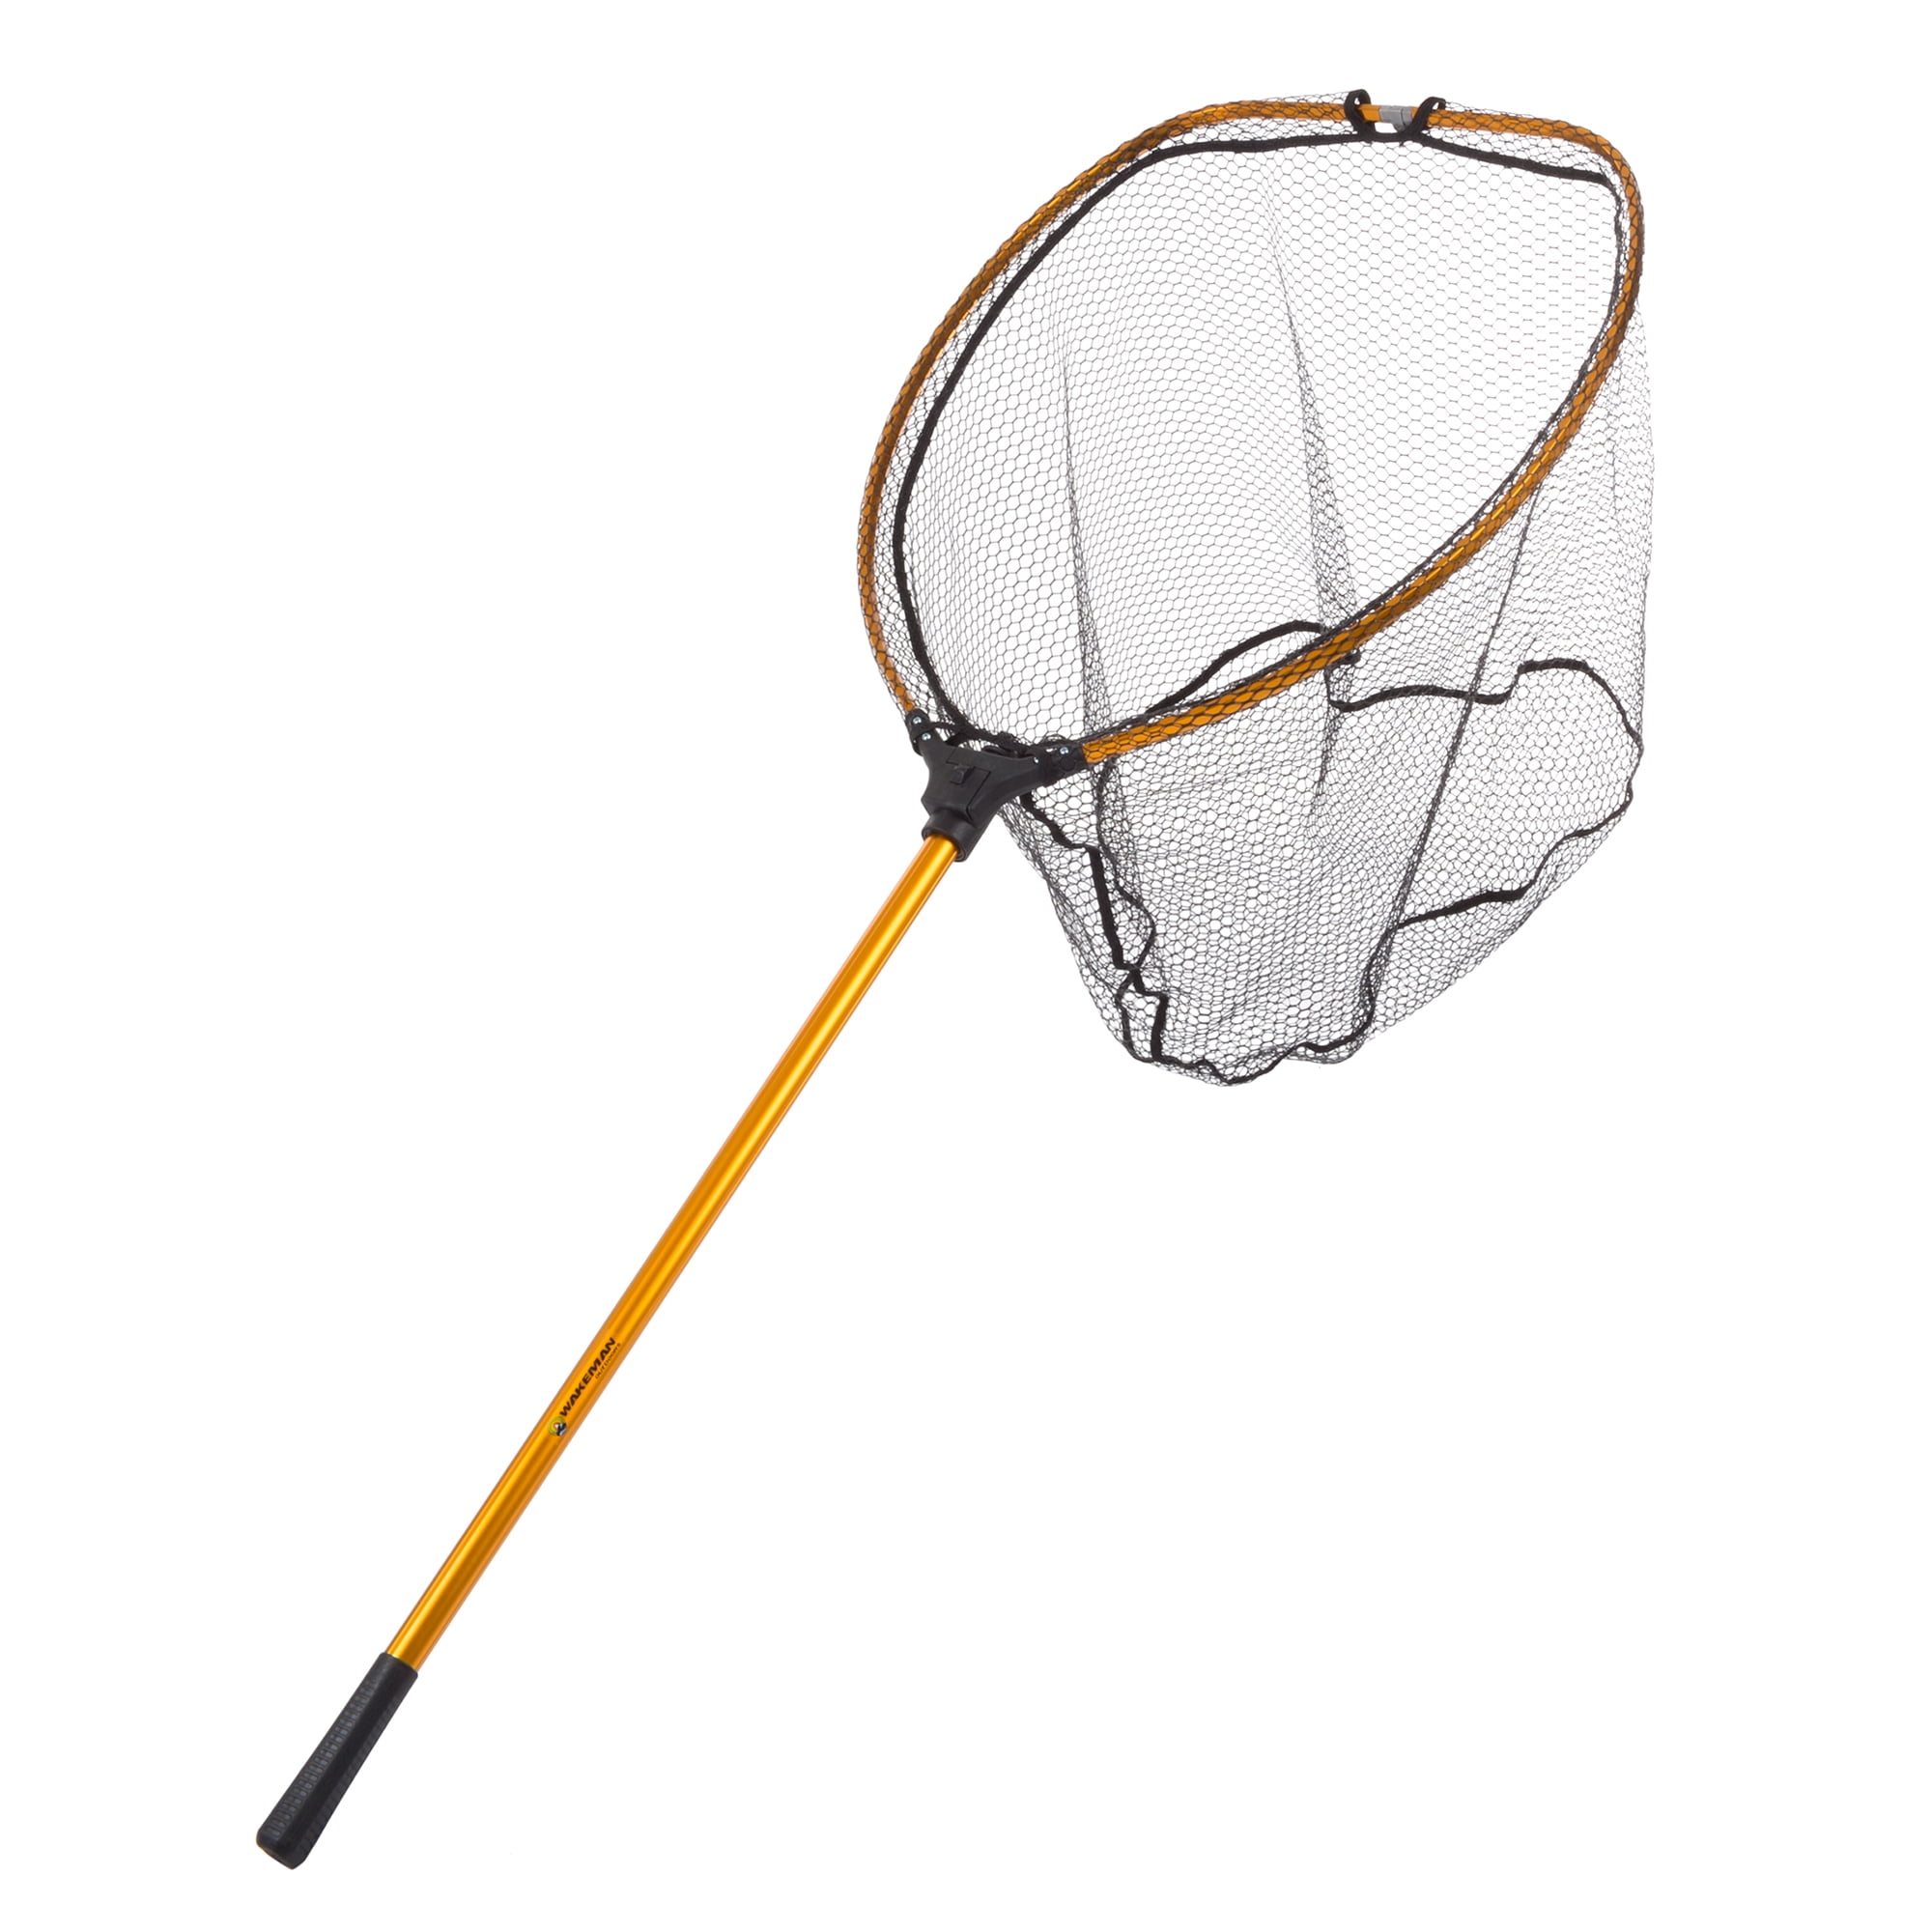 Fishing Landing Net- Collapsible and Foldable with Corrosion